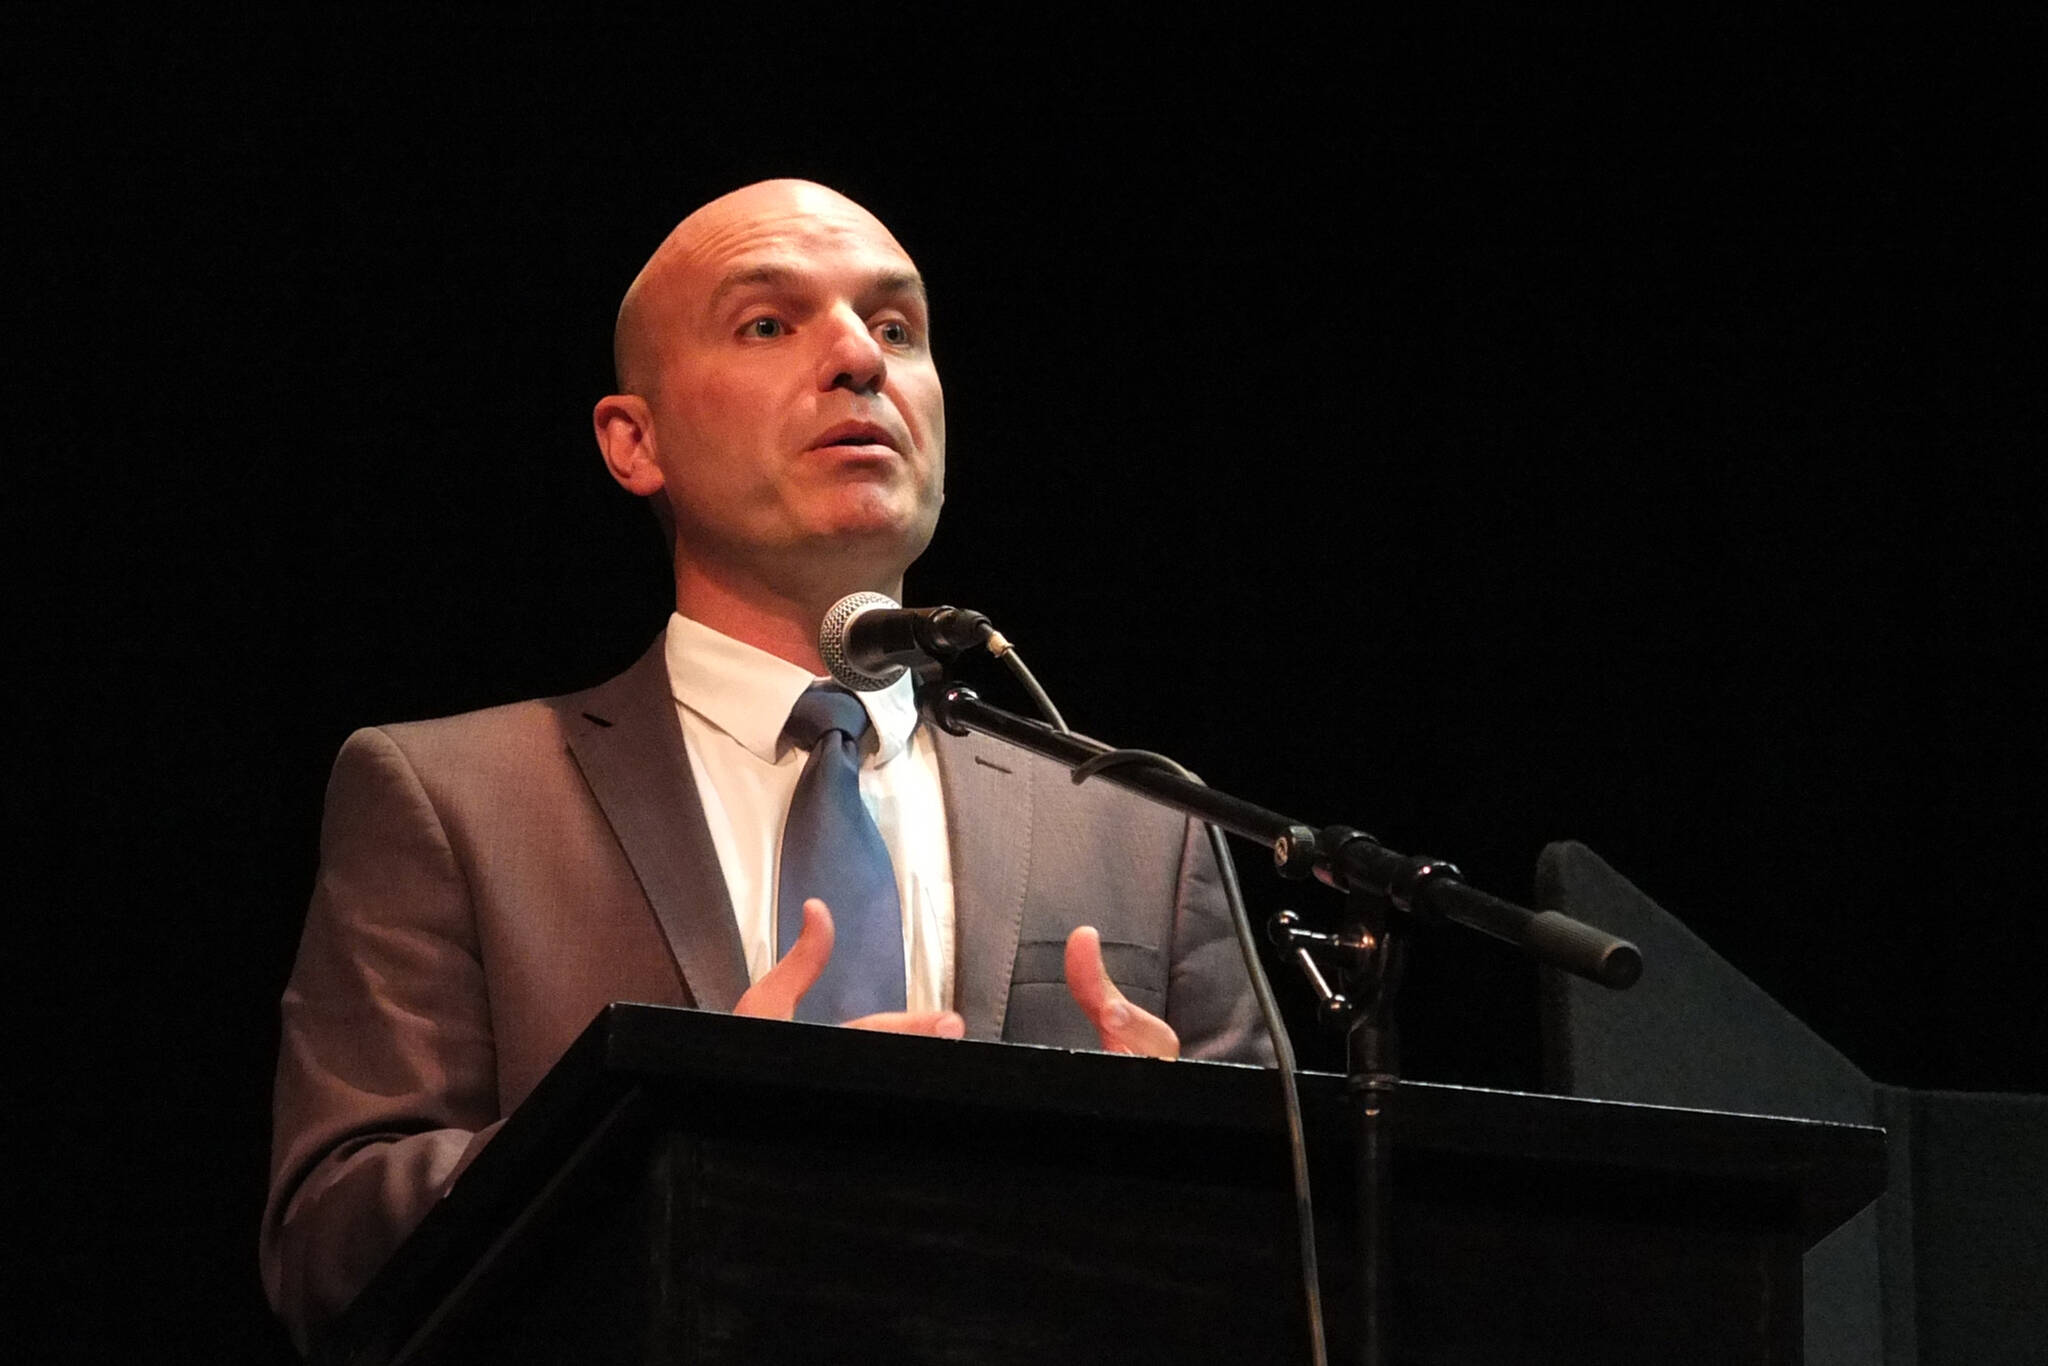 Minister of Water, Land and Resource Stewardship Nathan Cullen is rejecting criticisms of proposed amendments to the Land Act, saying First Nations won’t get a veto, as claimed by critics. (Black Press Media file photo)